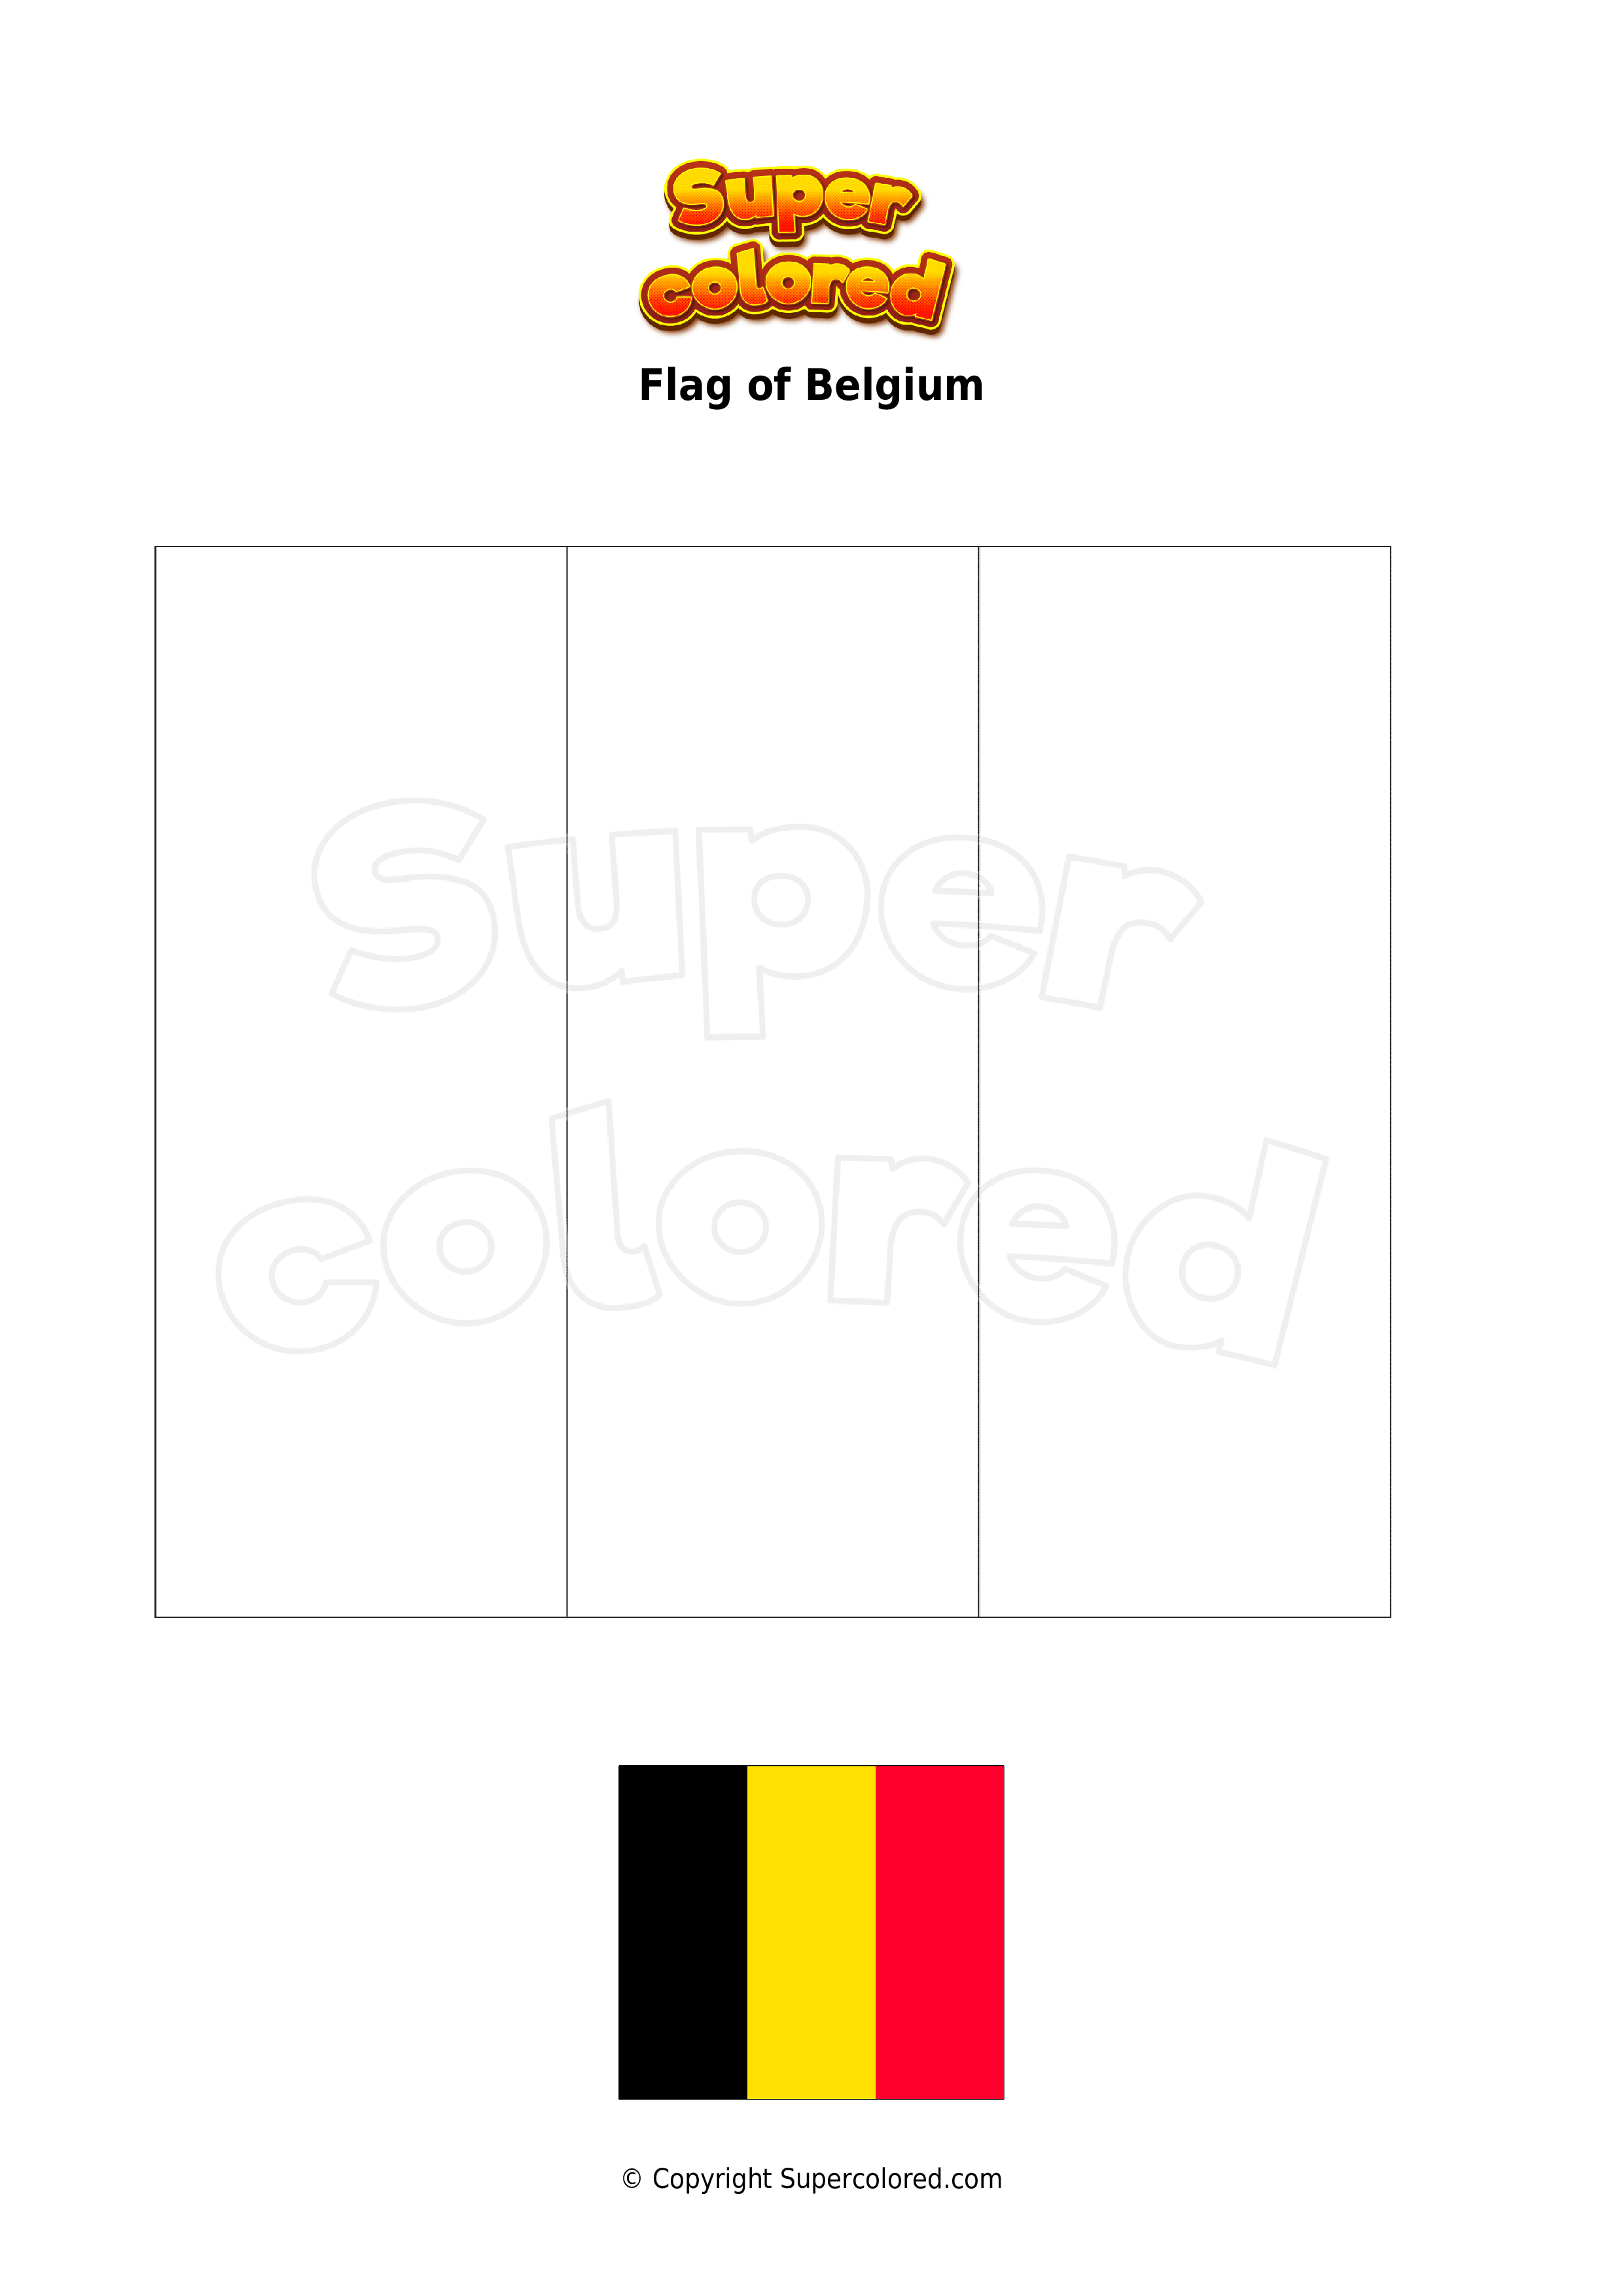 Coloring page Flag of Belgium - Supercolored.com